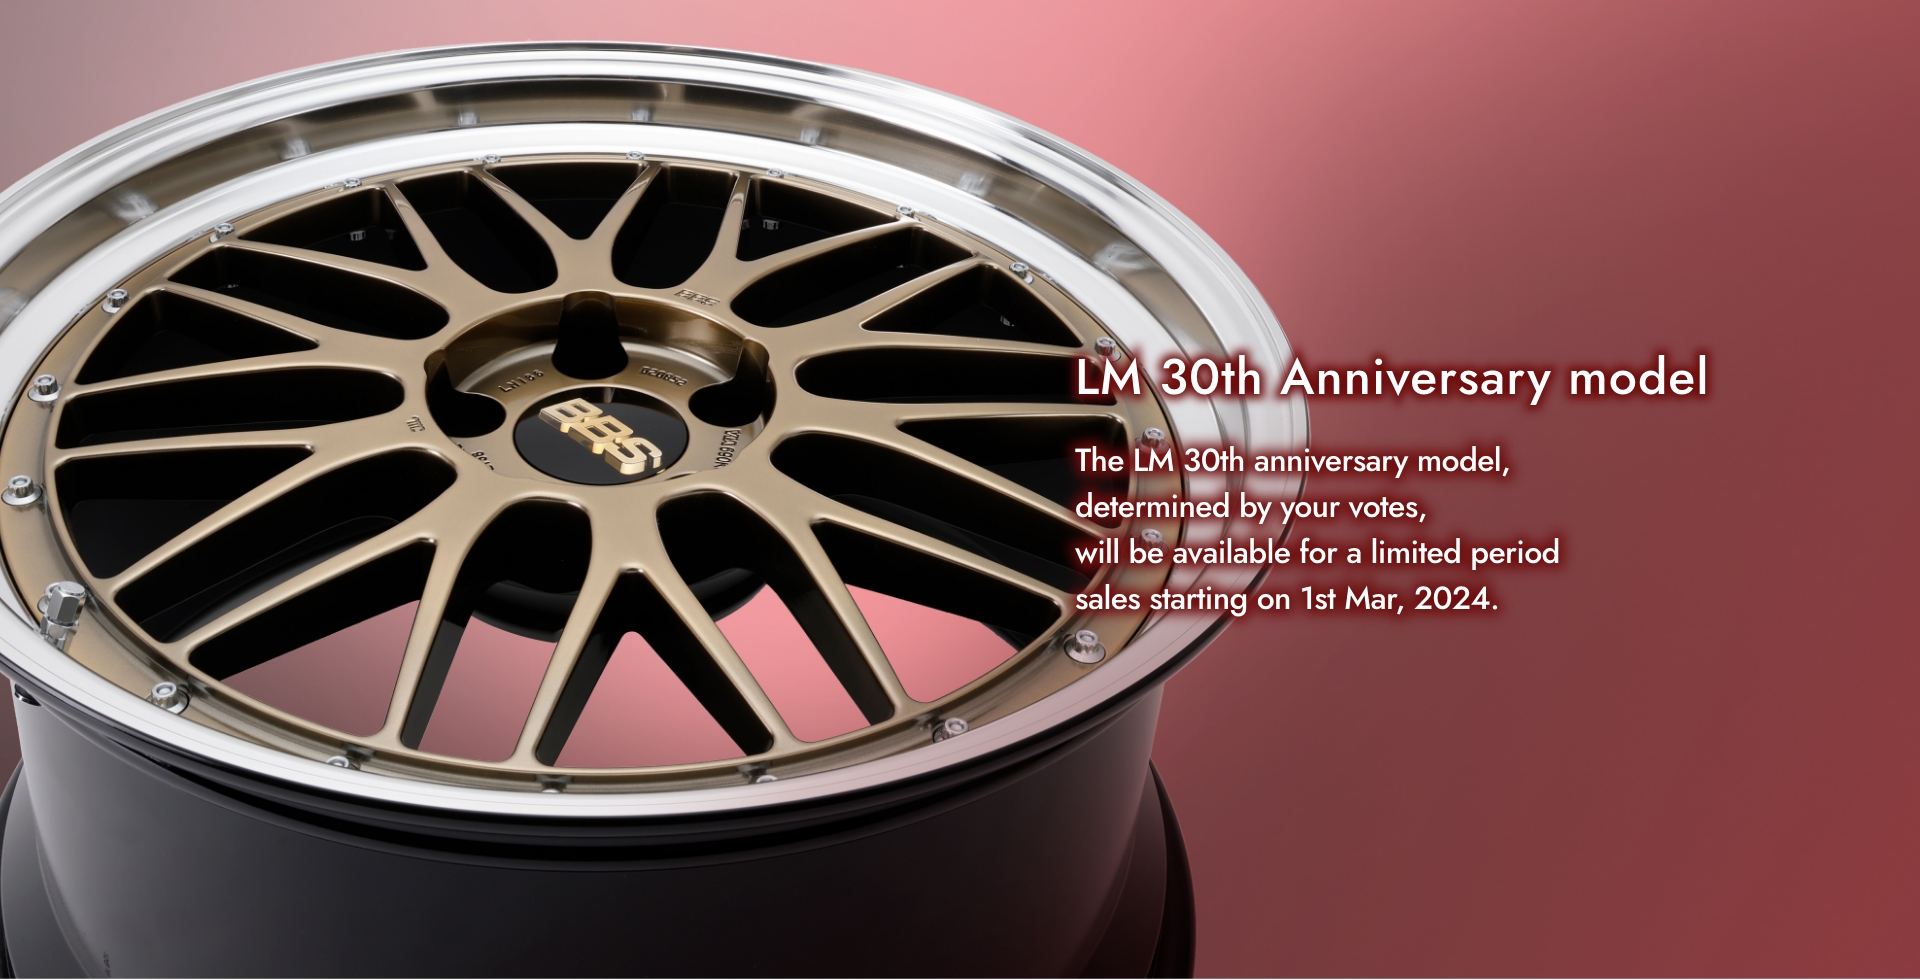 LM 30th Anniversary model The LM 30th anniversary model, determined by your votes, will be available for a limited period sales starting on 1st Mar, 2024.